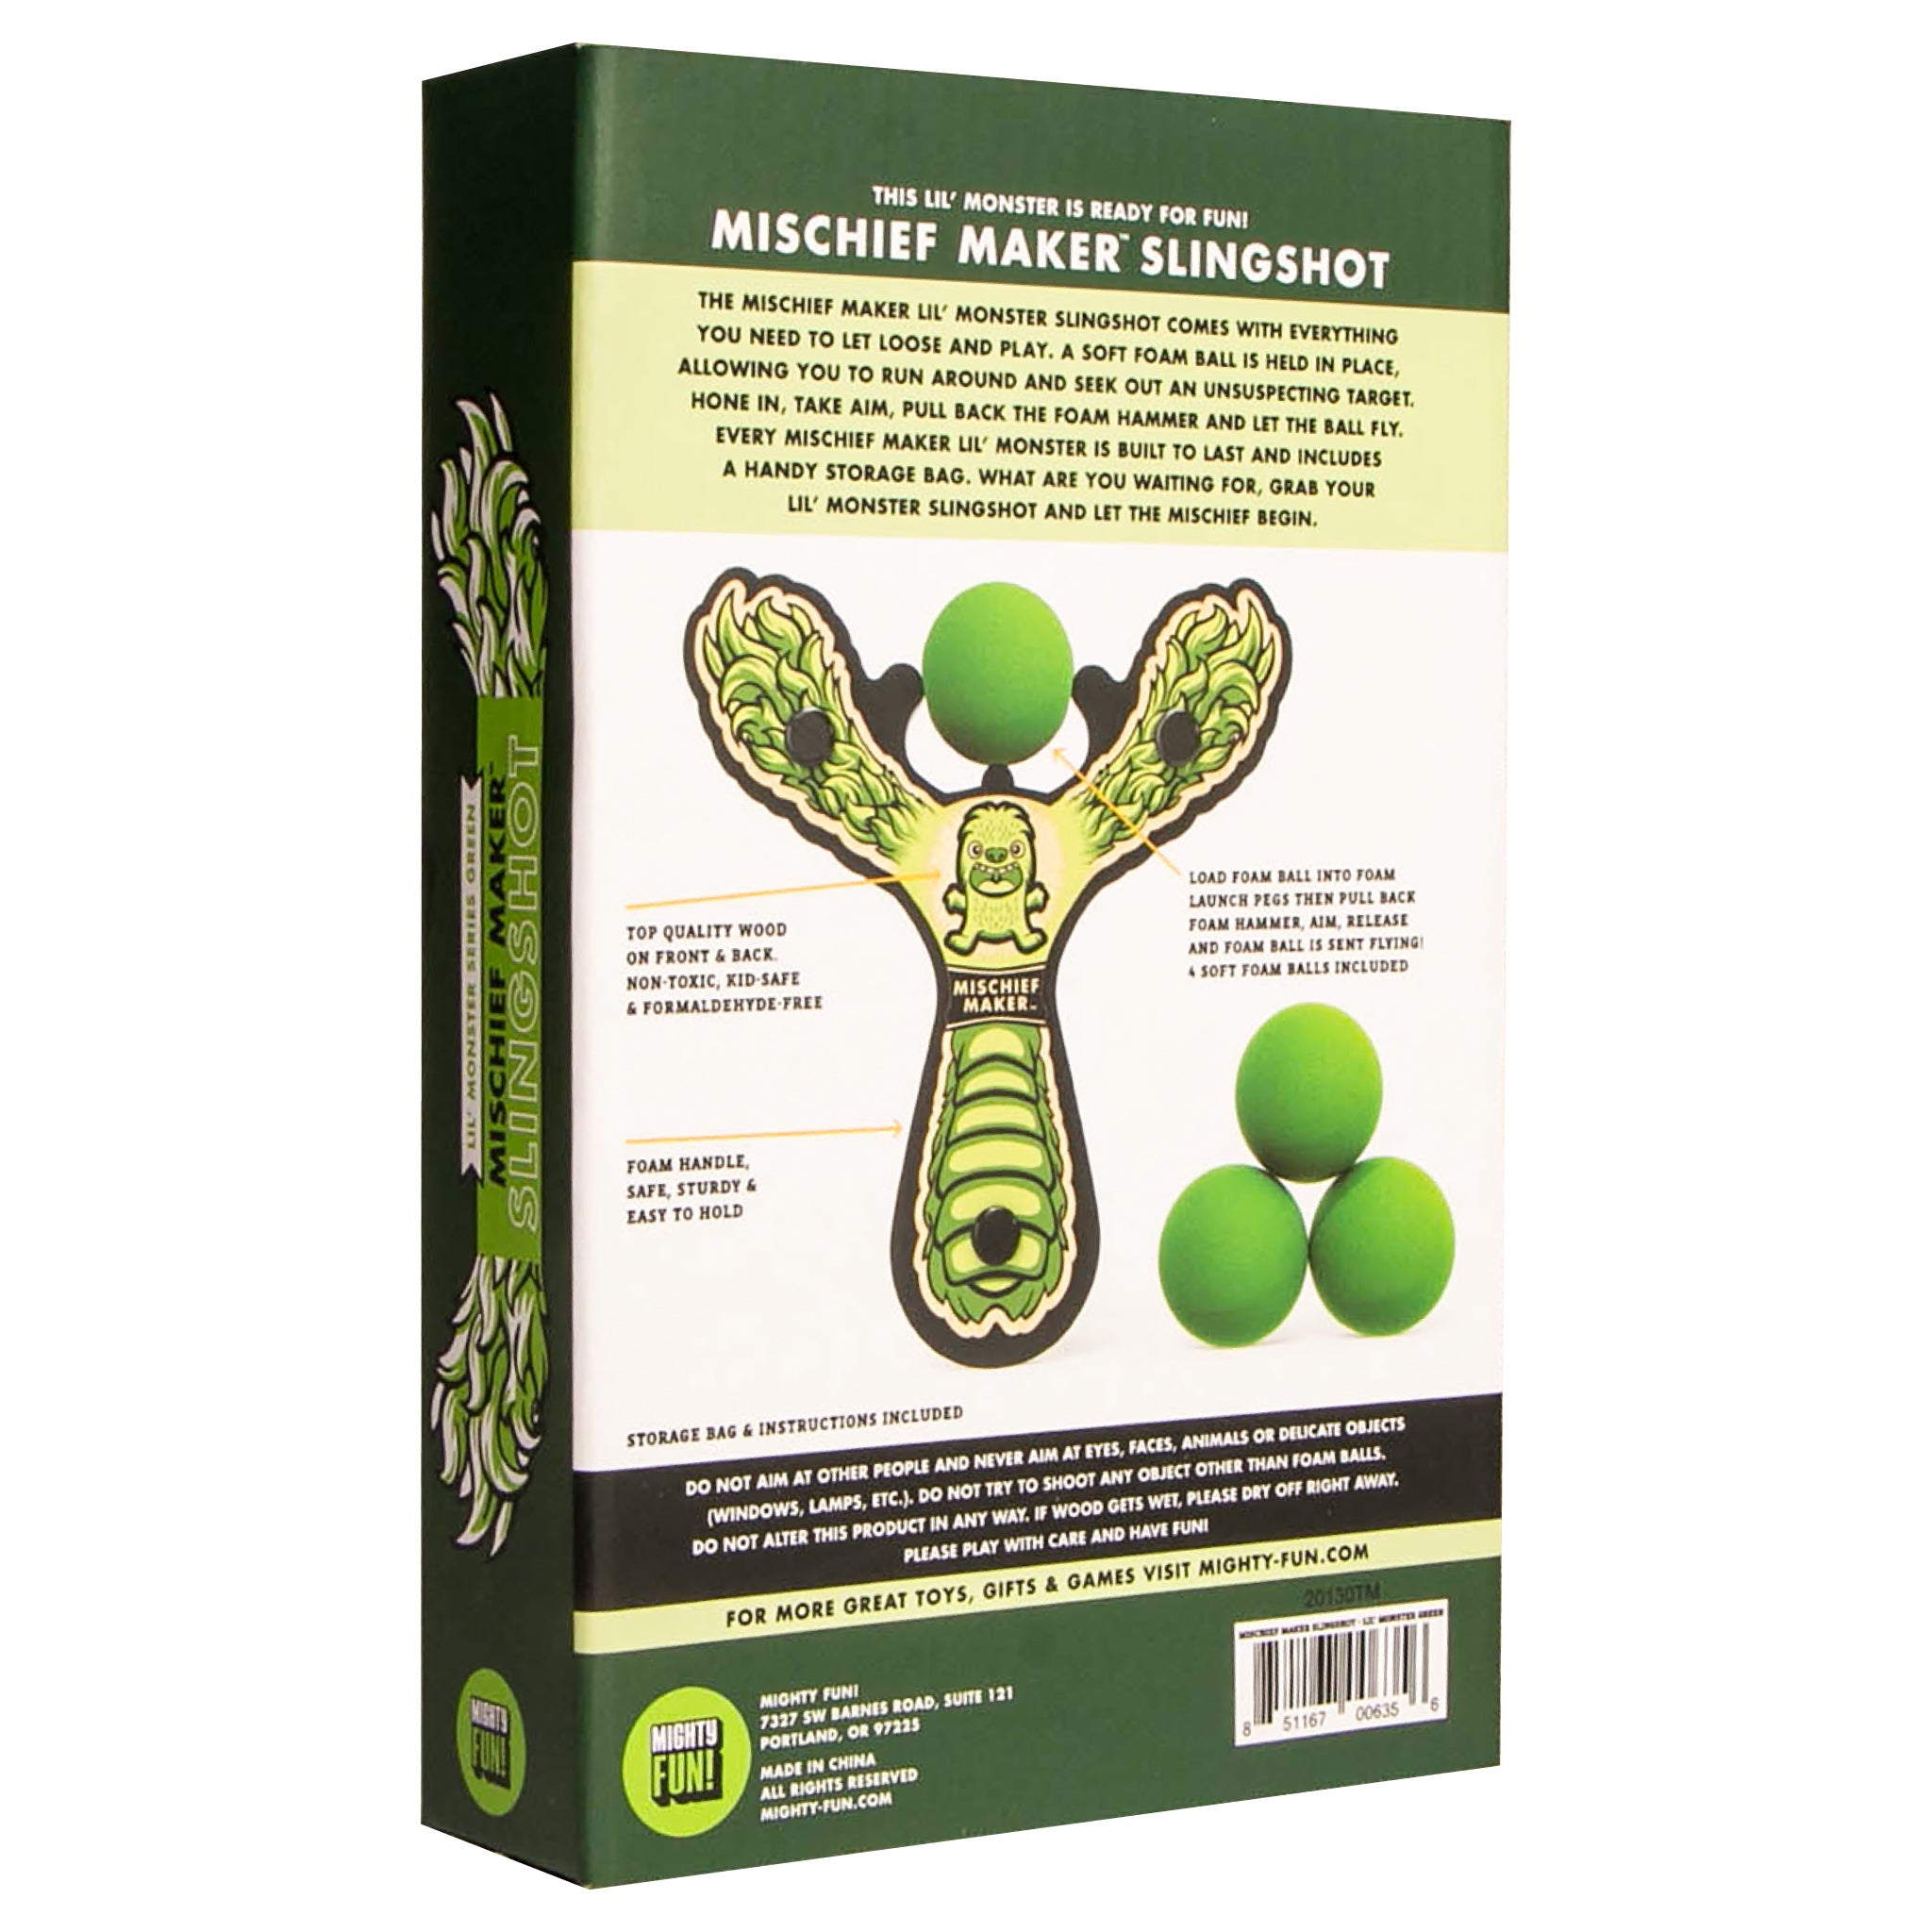 Green Monster toy slingshot color kids gift box. Mischief Maker by Mighty Fun!